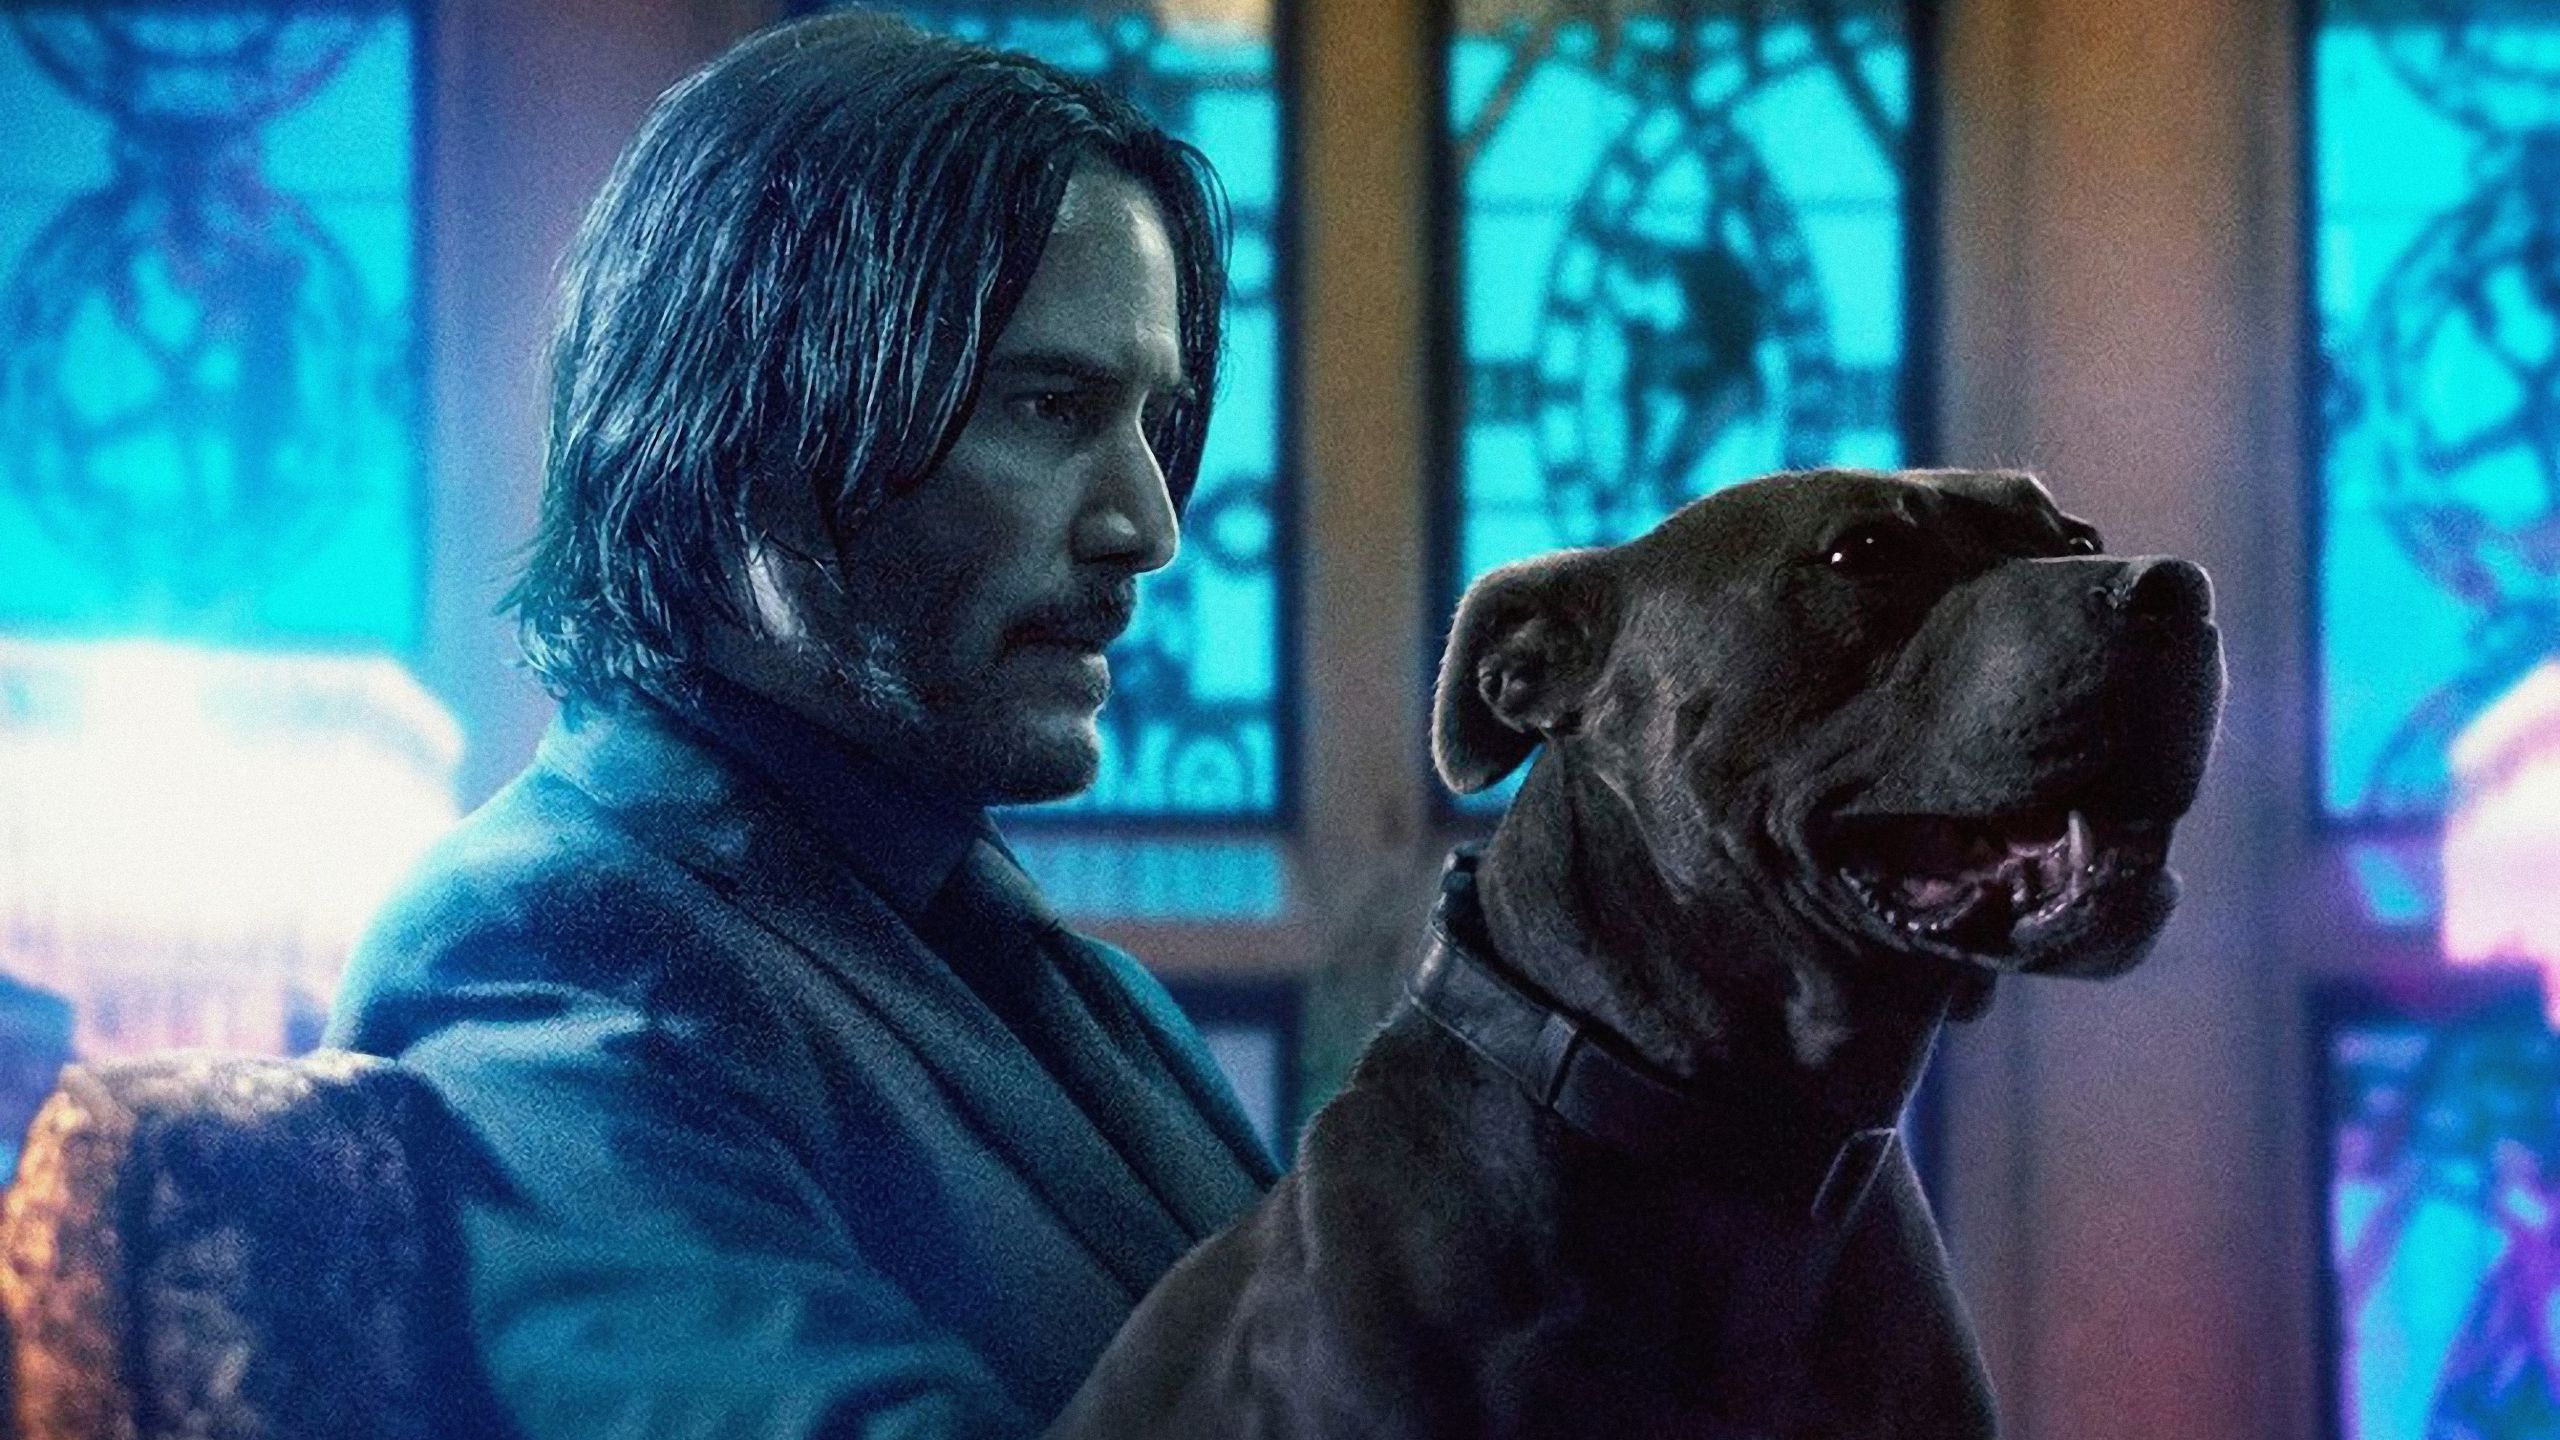 John Wick Chapter 3 1440P Resolution Wallpaper, HD Movies 4K Wallpaper, Image, Photo and Background